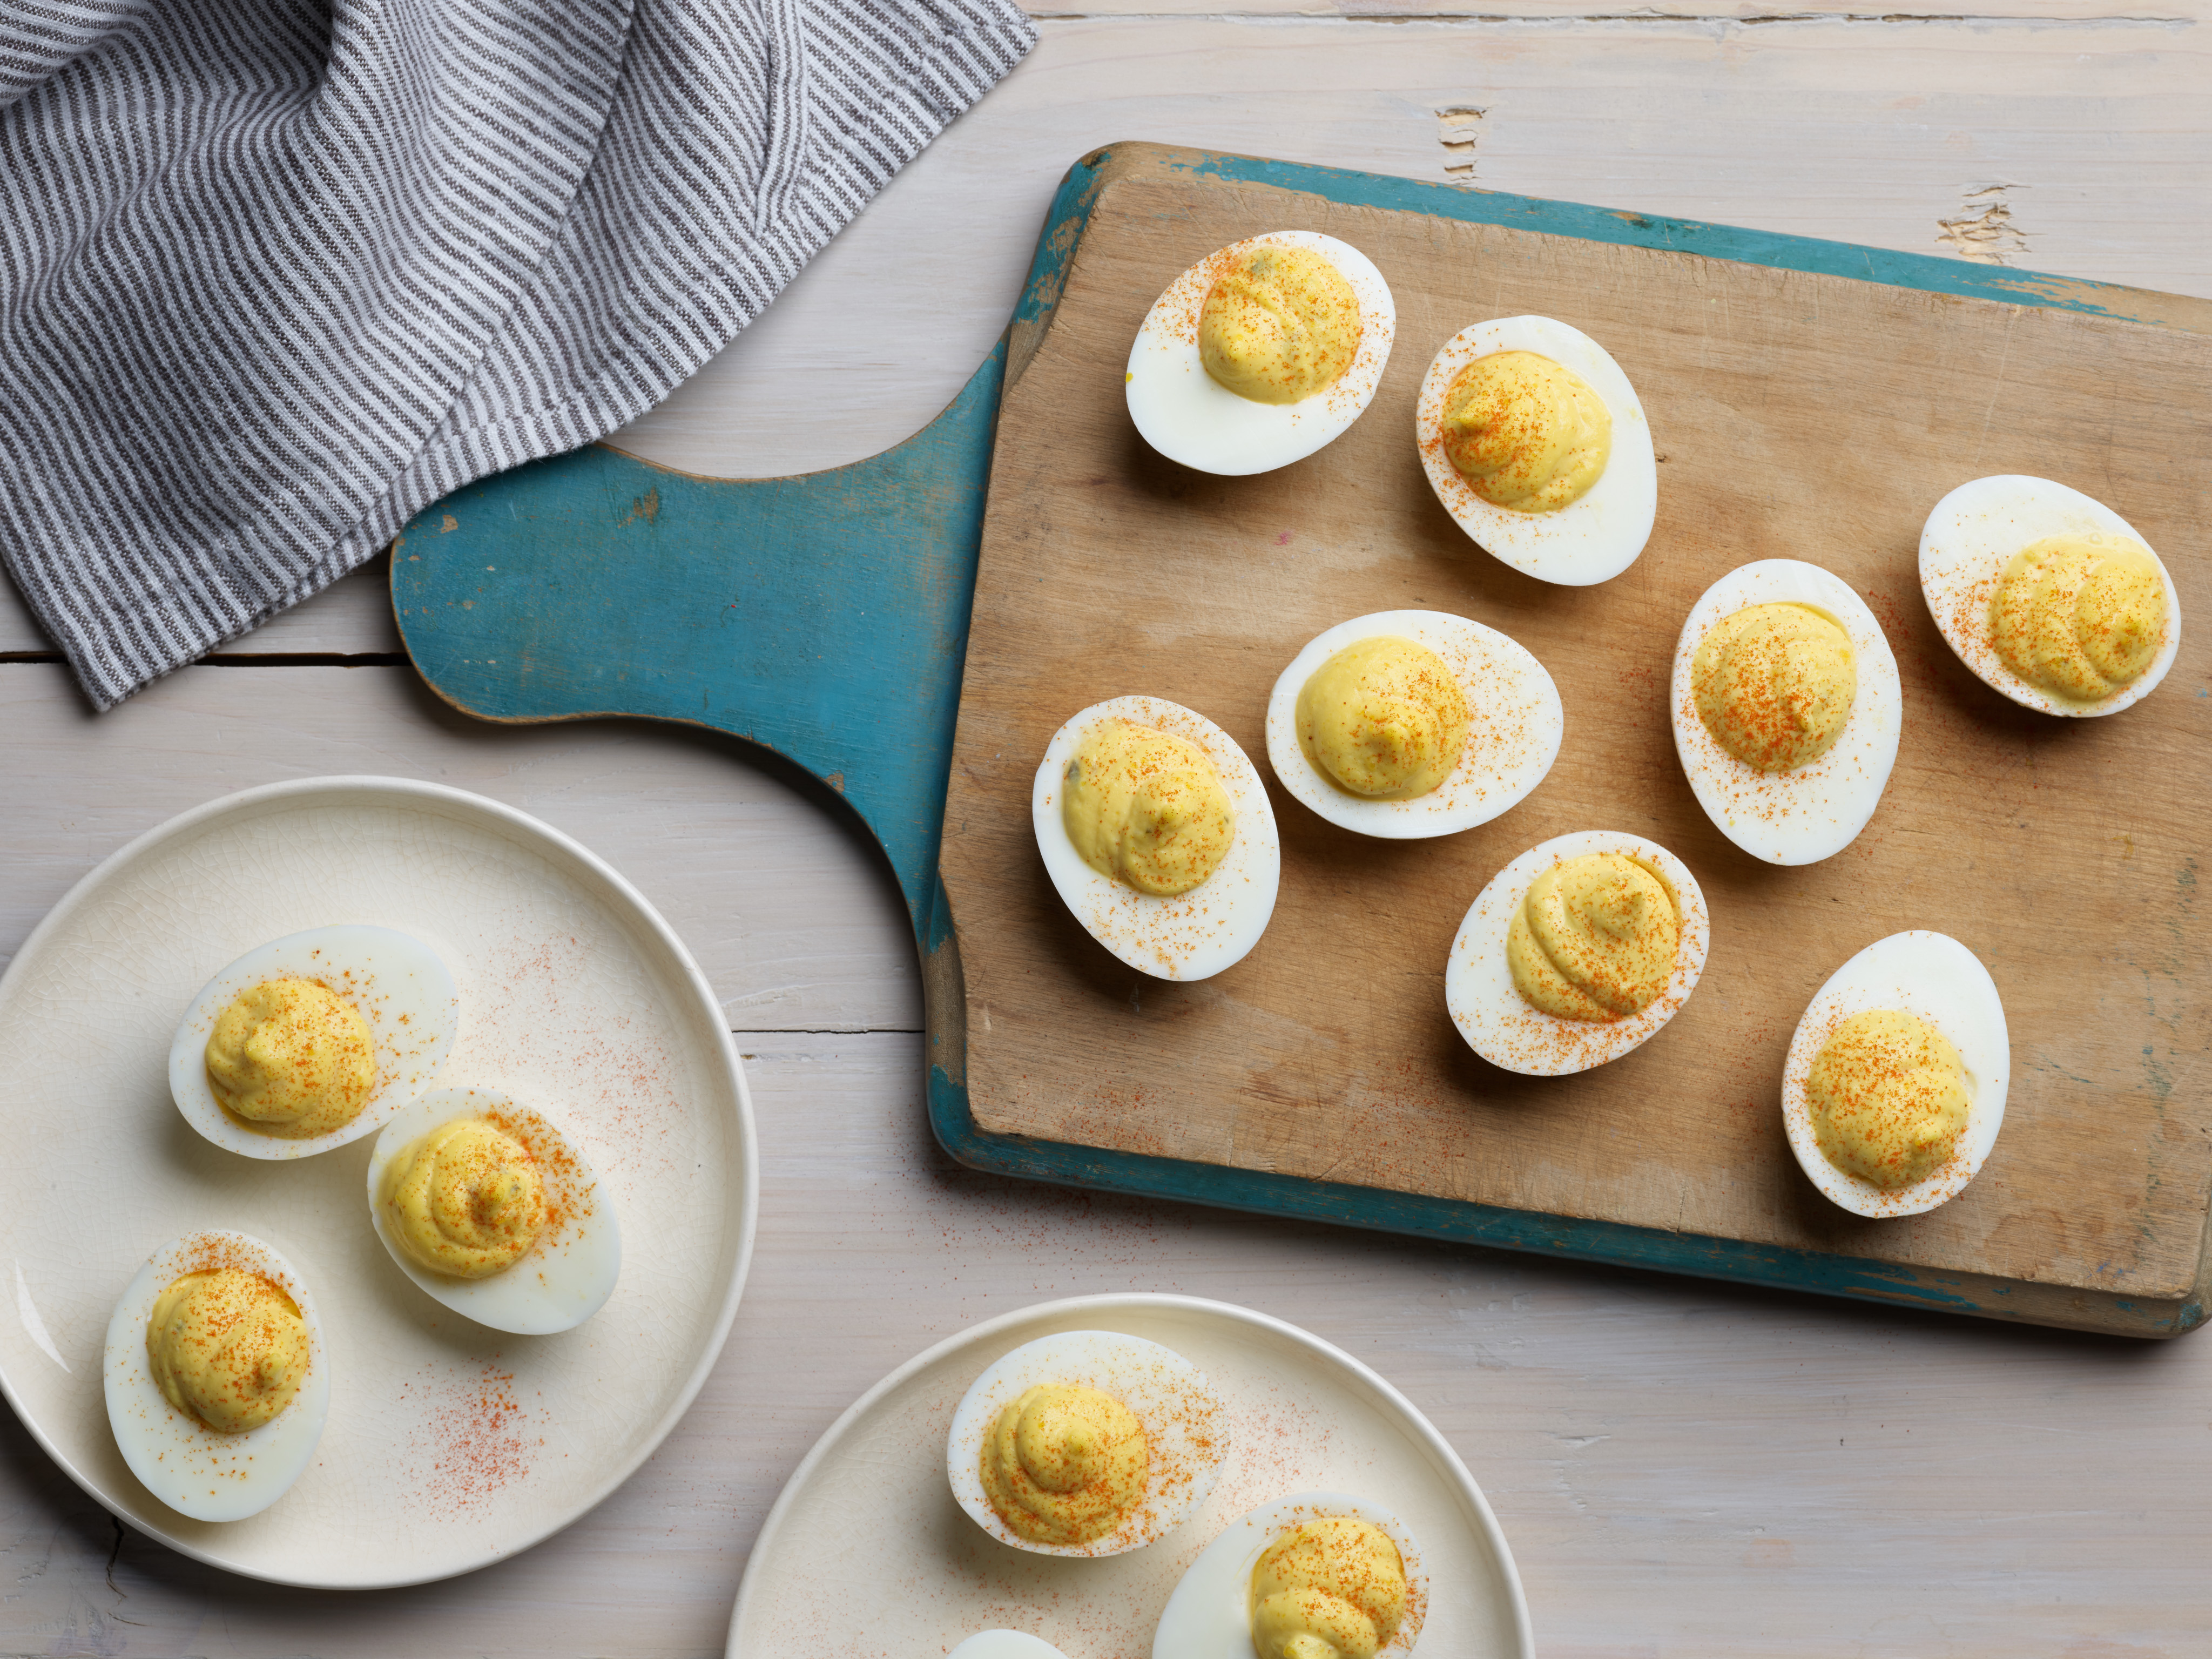 Traditional Deviled Eggs - Taste of the Frontier